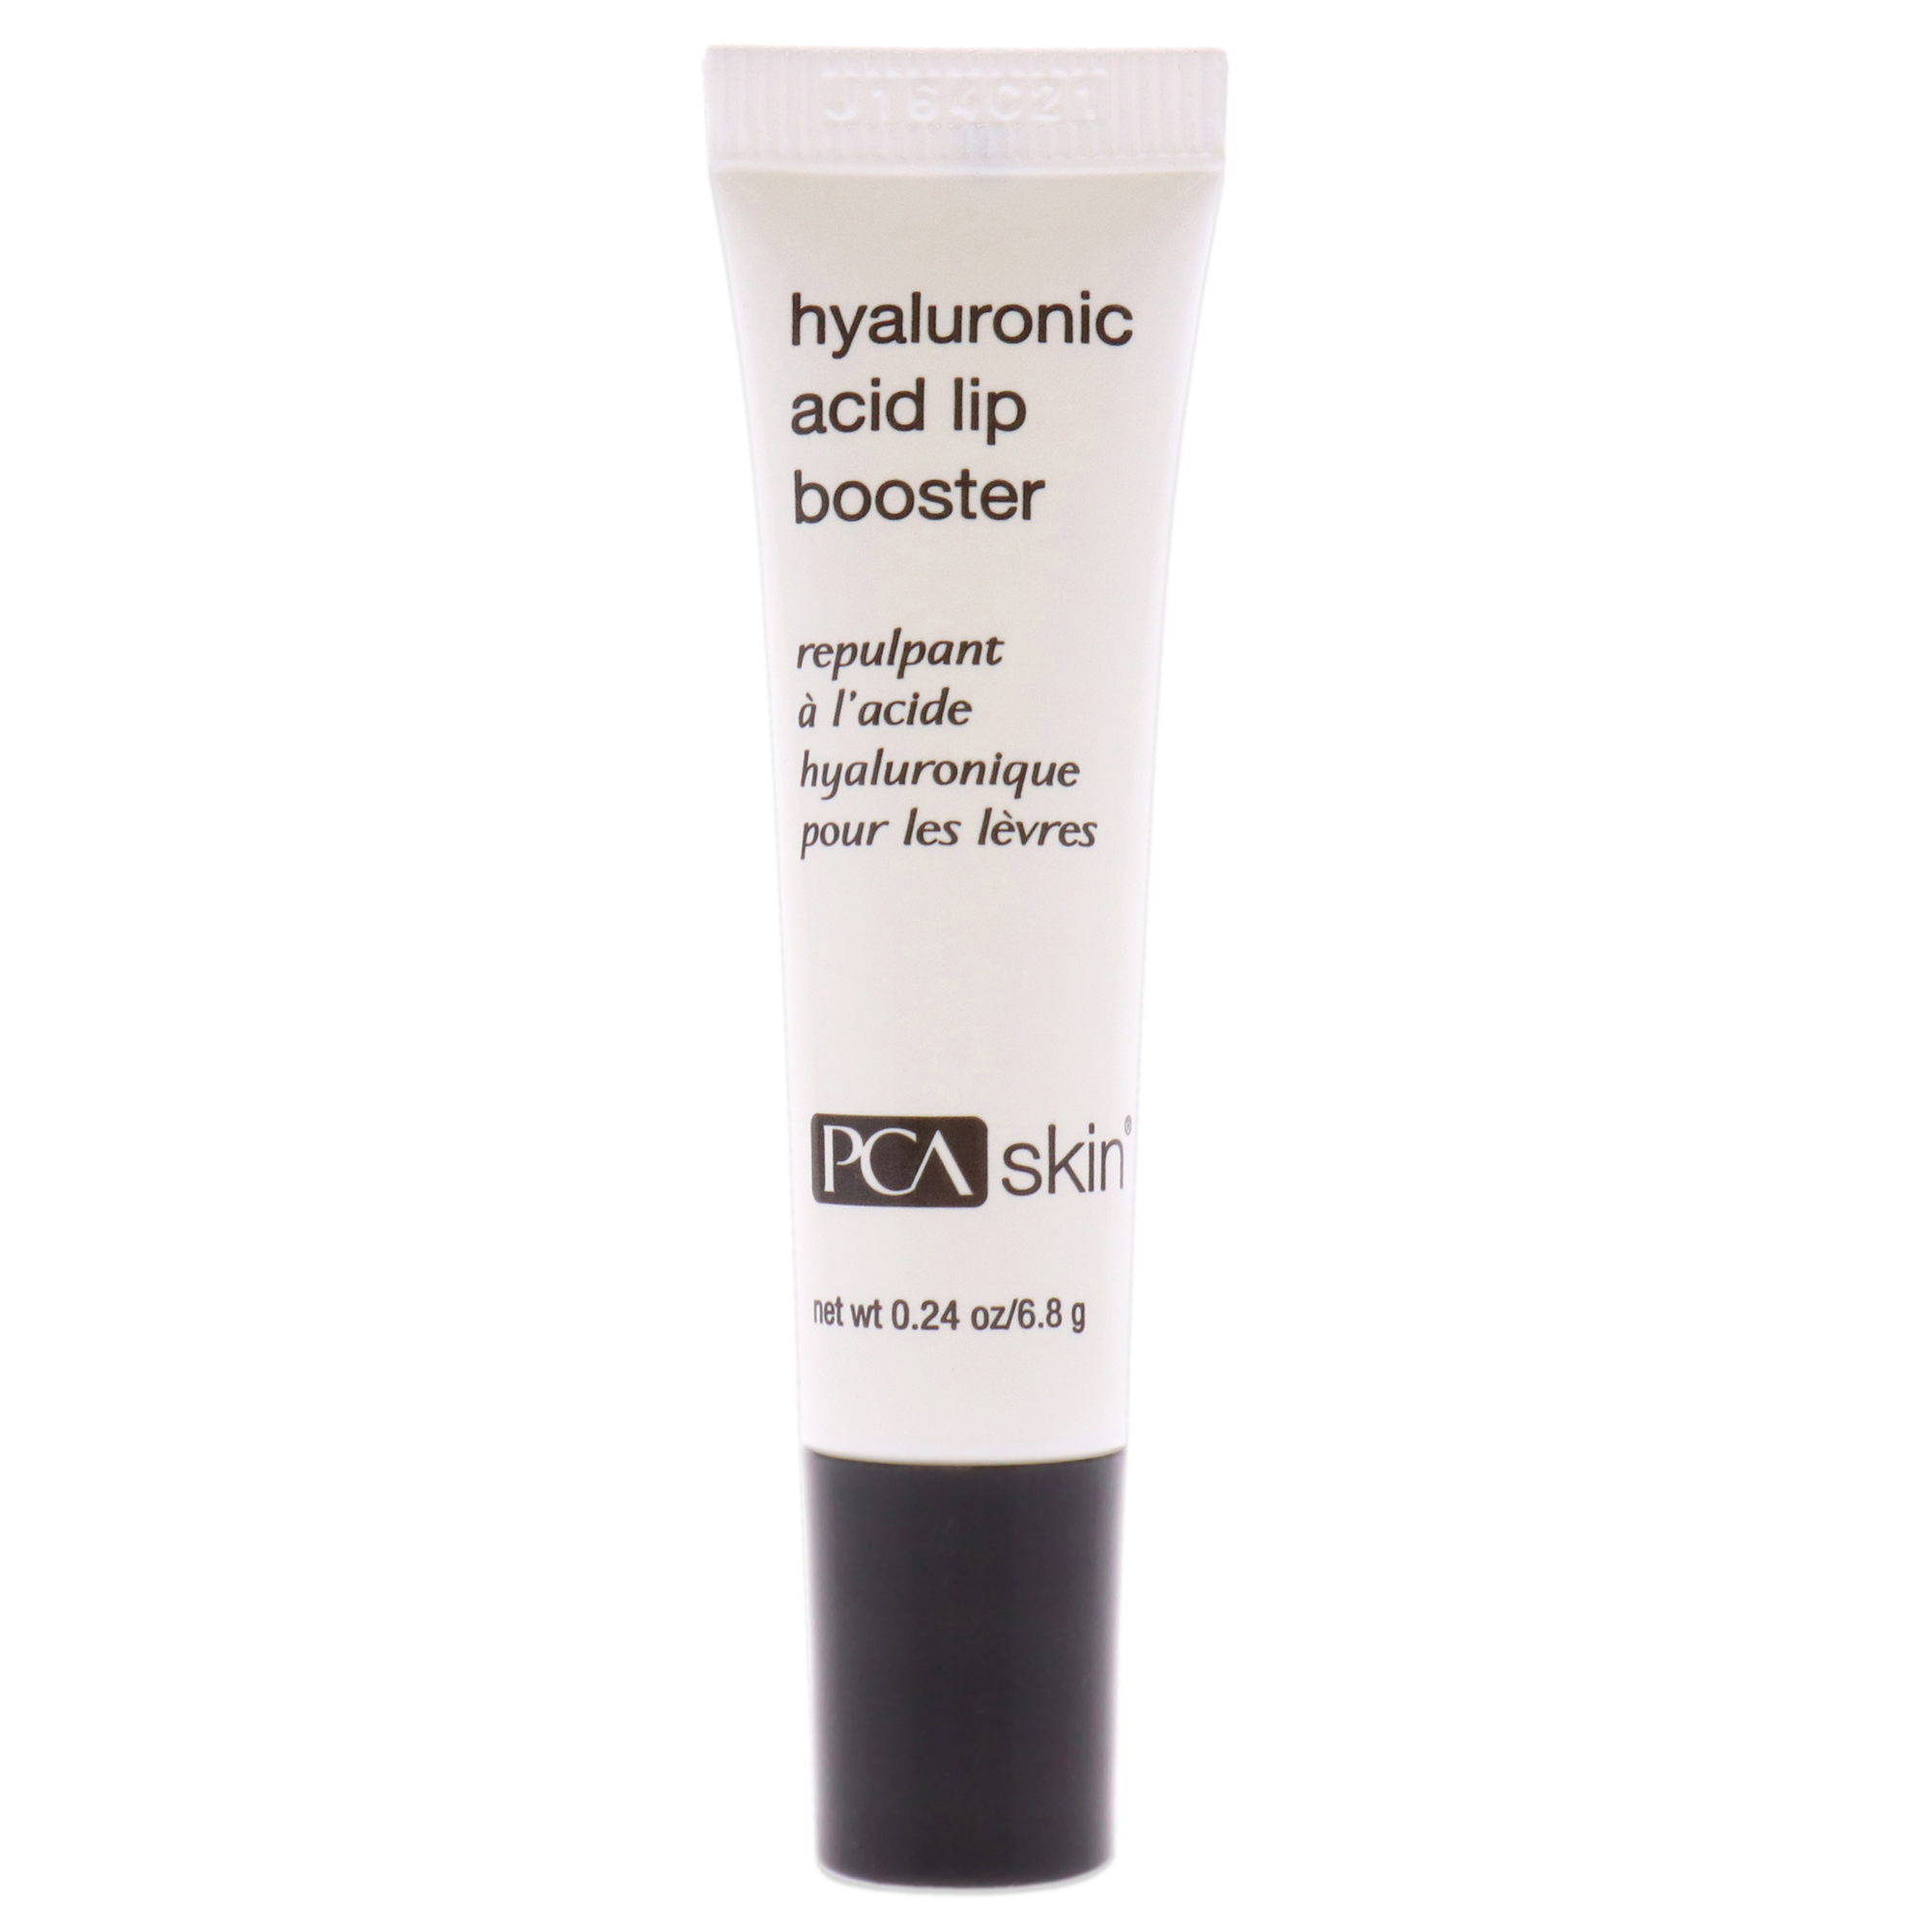 PCA Skin Hyaluronic Acid Lip Booster by PCA Skin for Unisex - 0.24 oz Booster